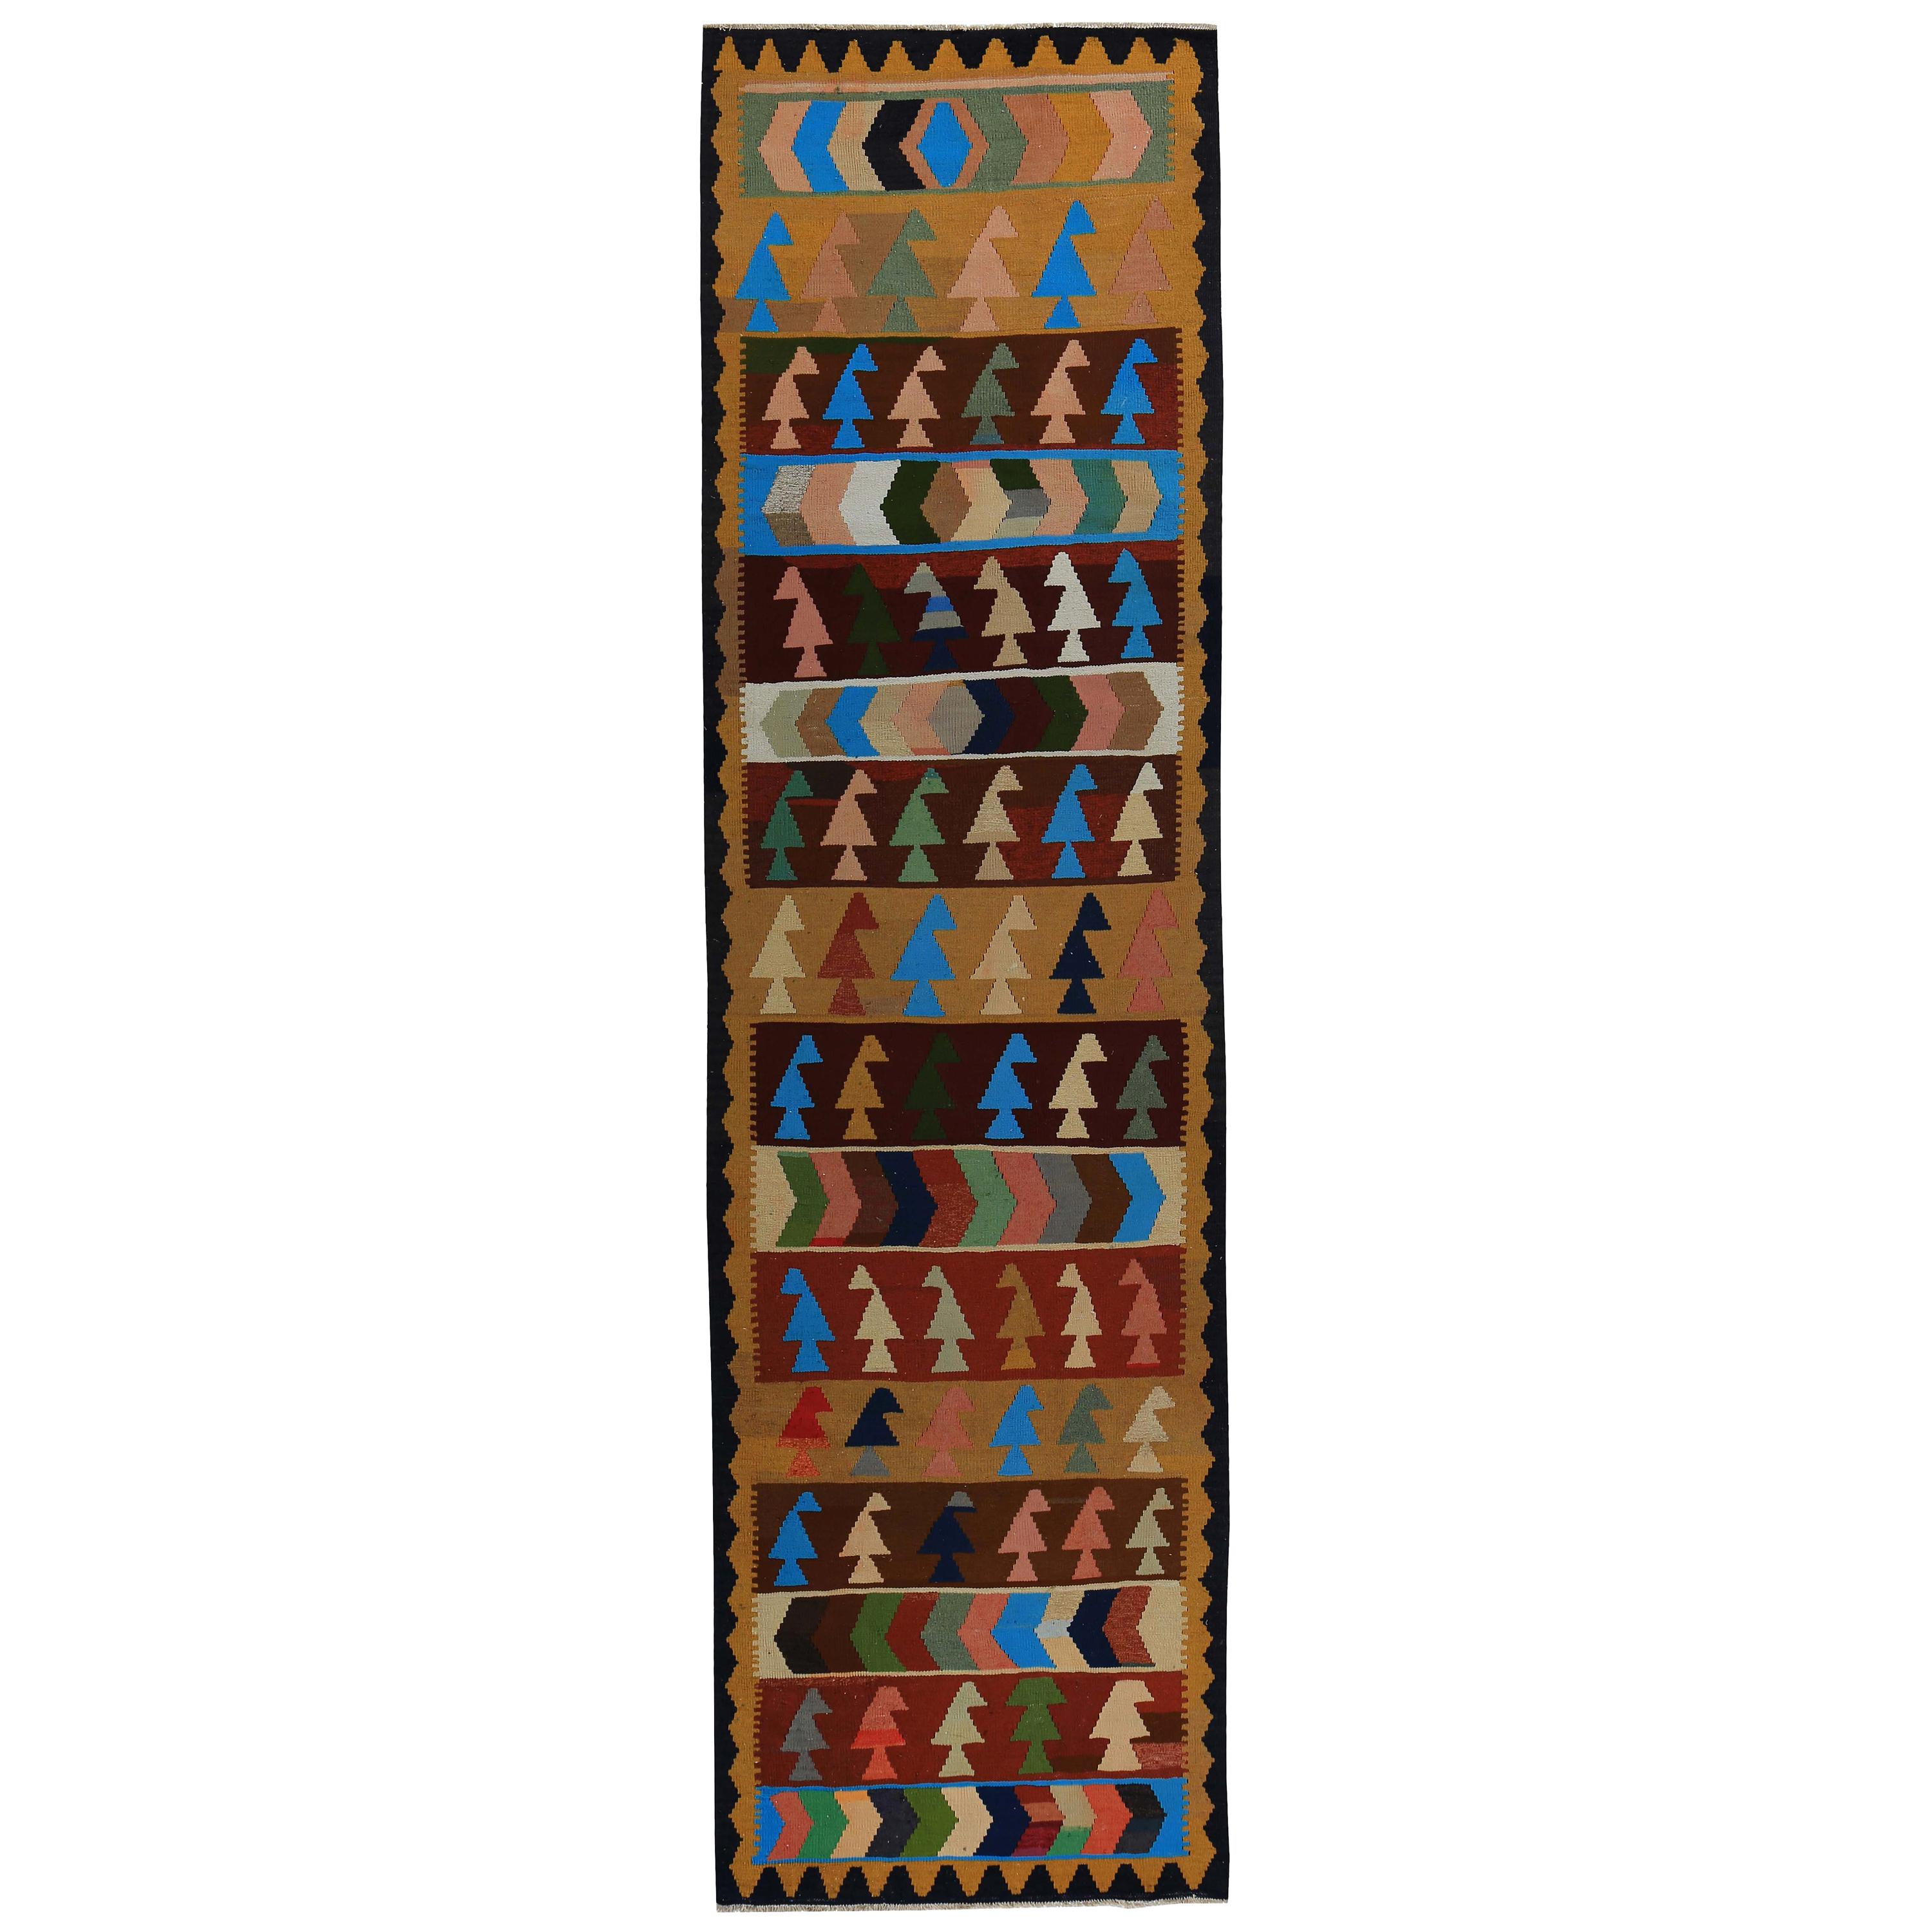 Turkish Kilim Runner Rug with Colored Tribal Details and Stripes on Brown Field